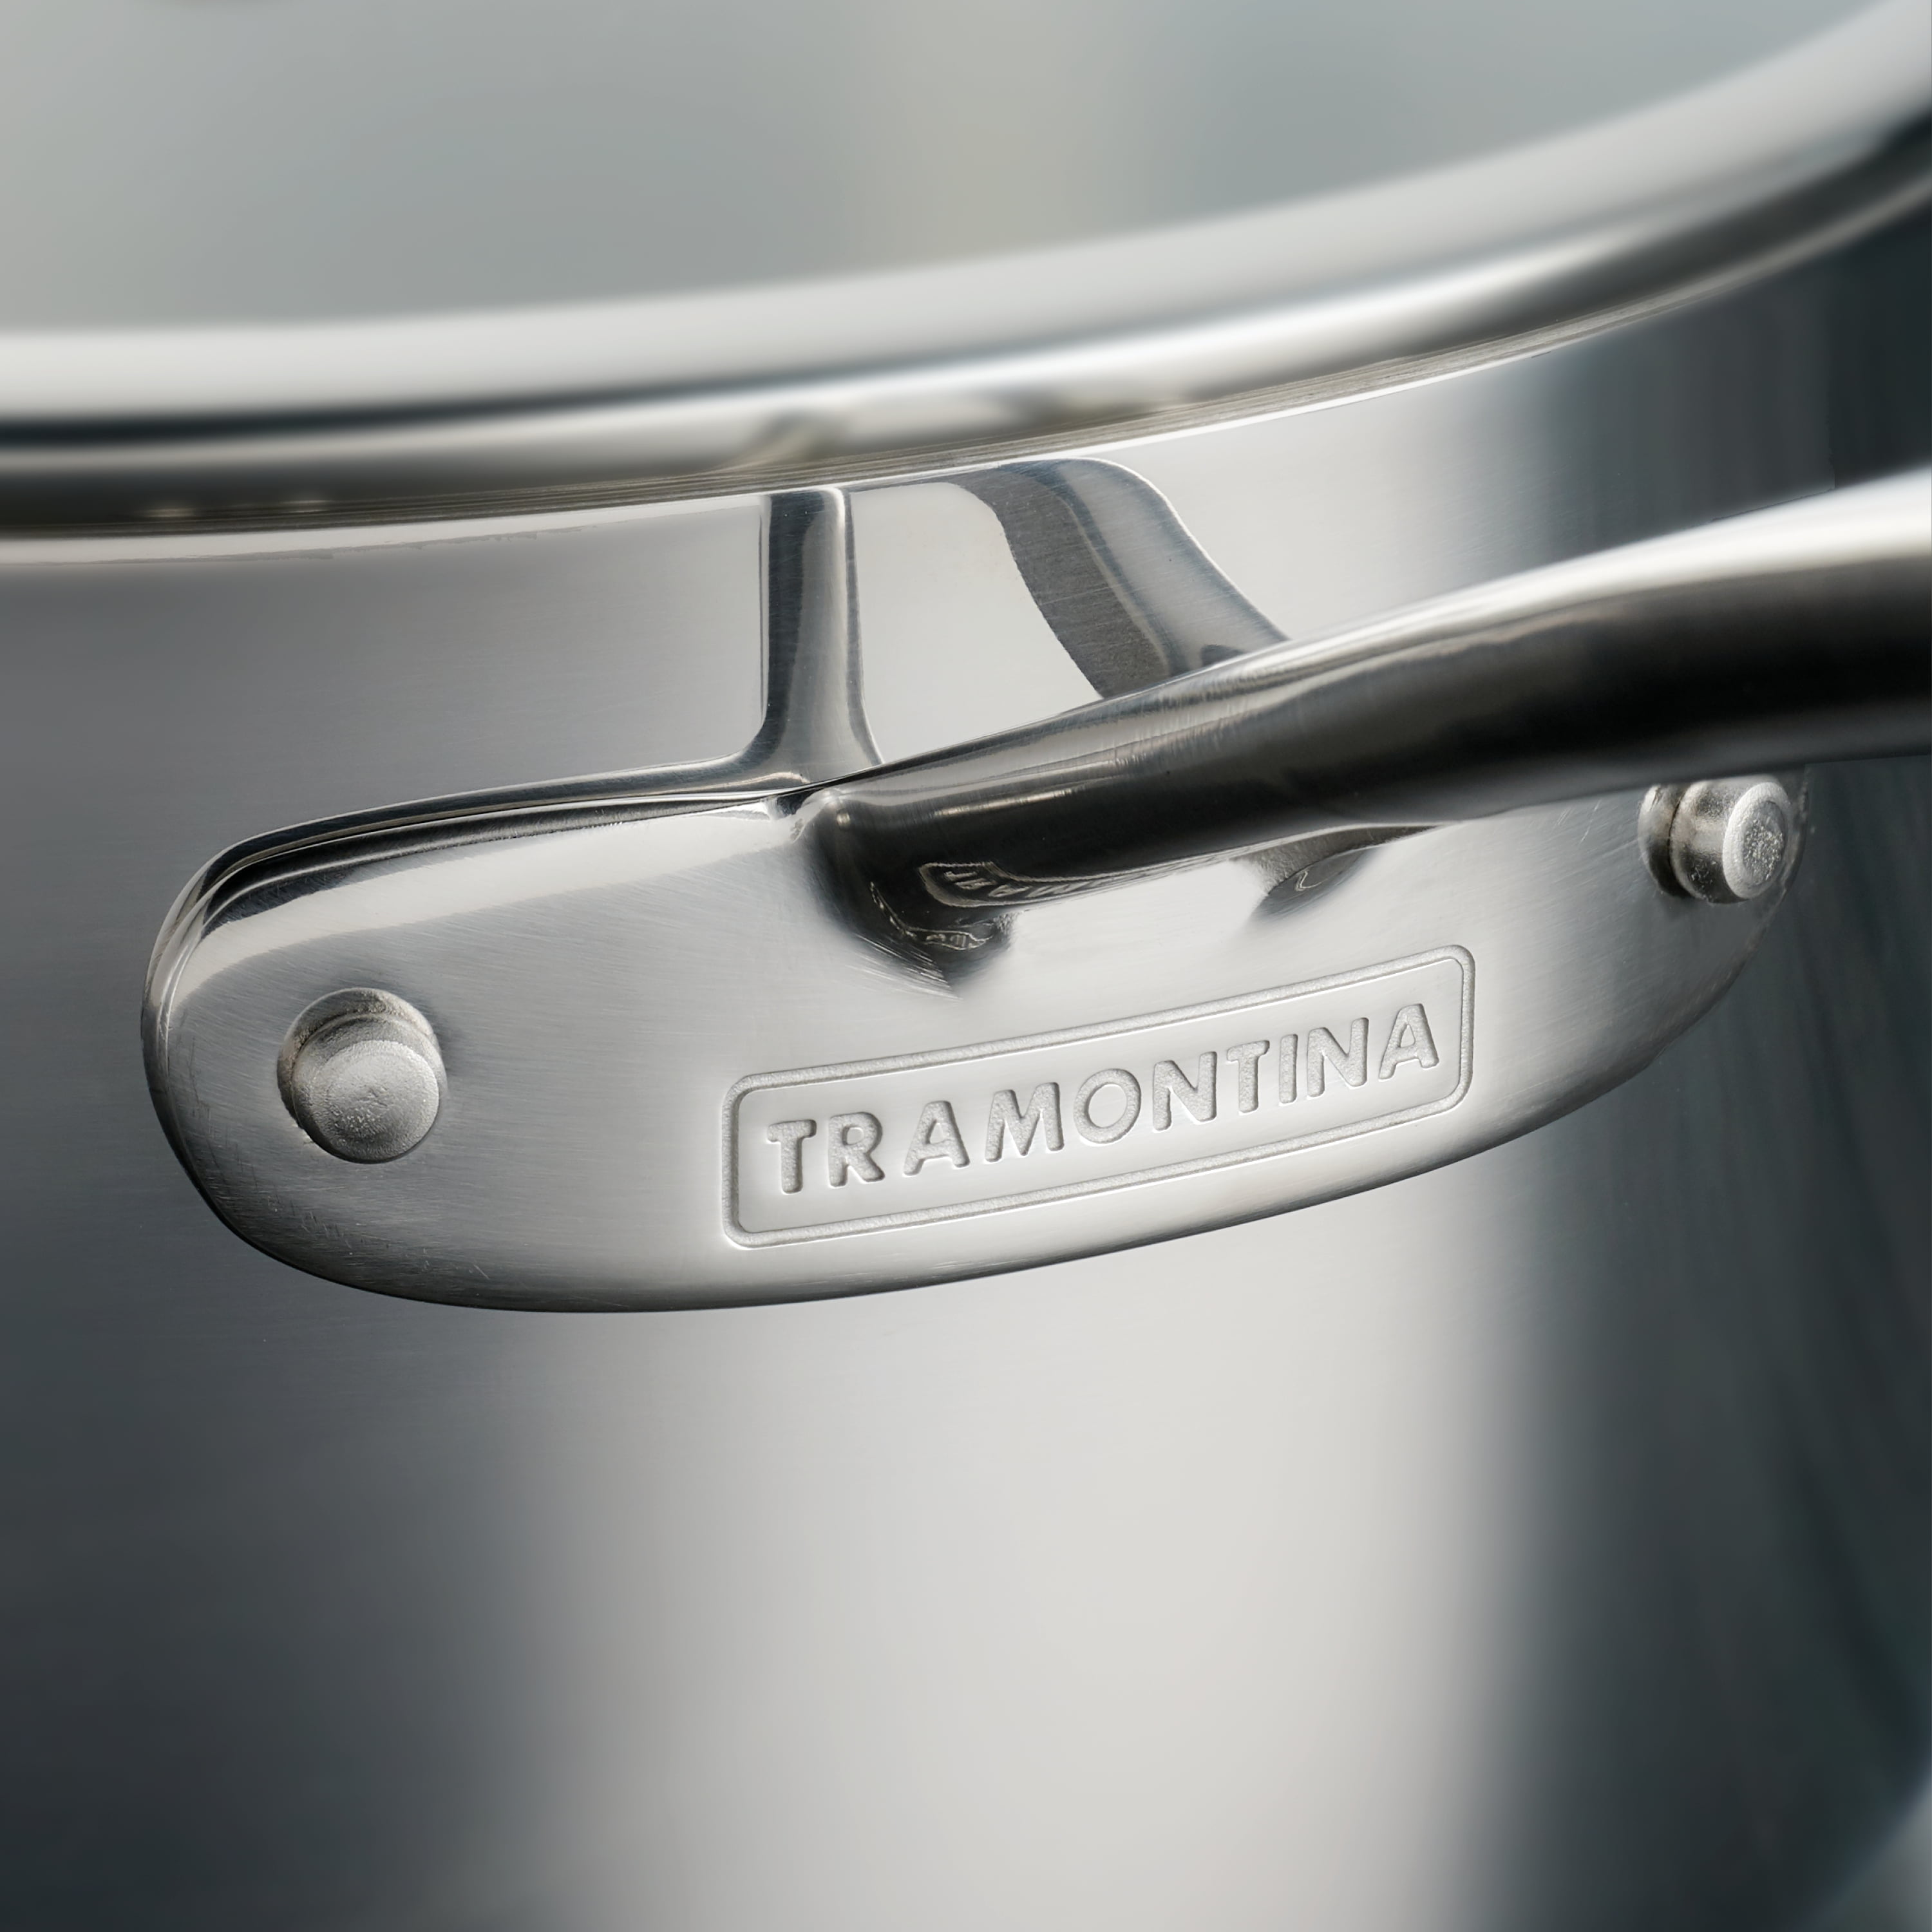 Tramontina Covered Sauce Pan Stainless Steel Tri-Ply Clad 1.5-Quart,  80116/021DS